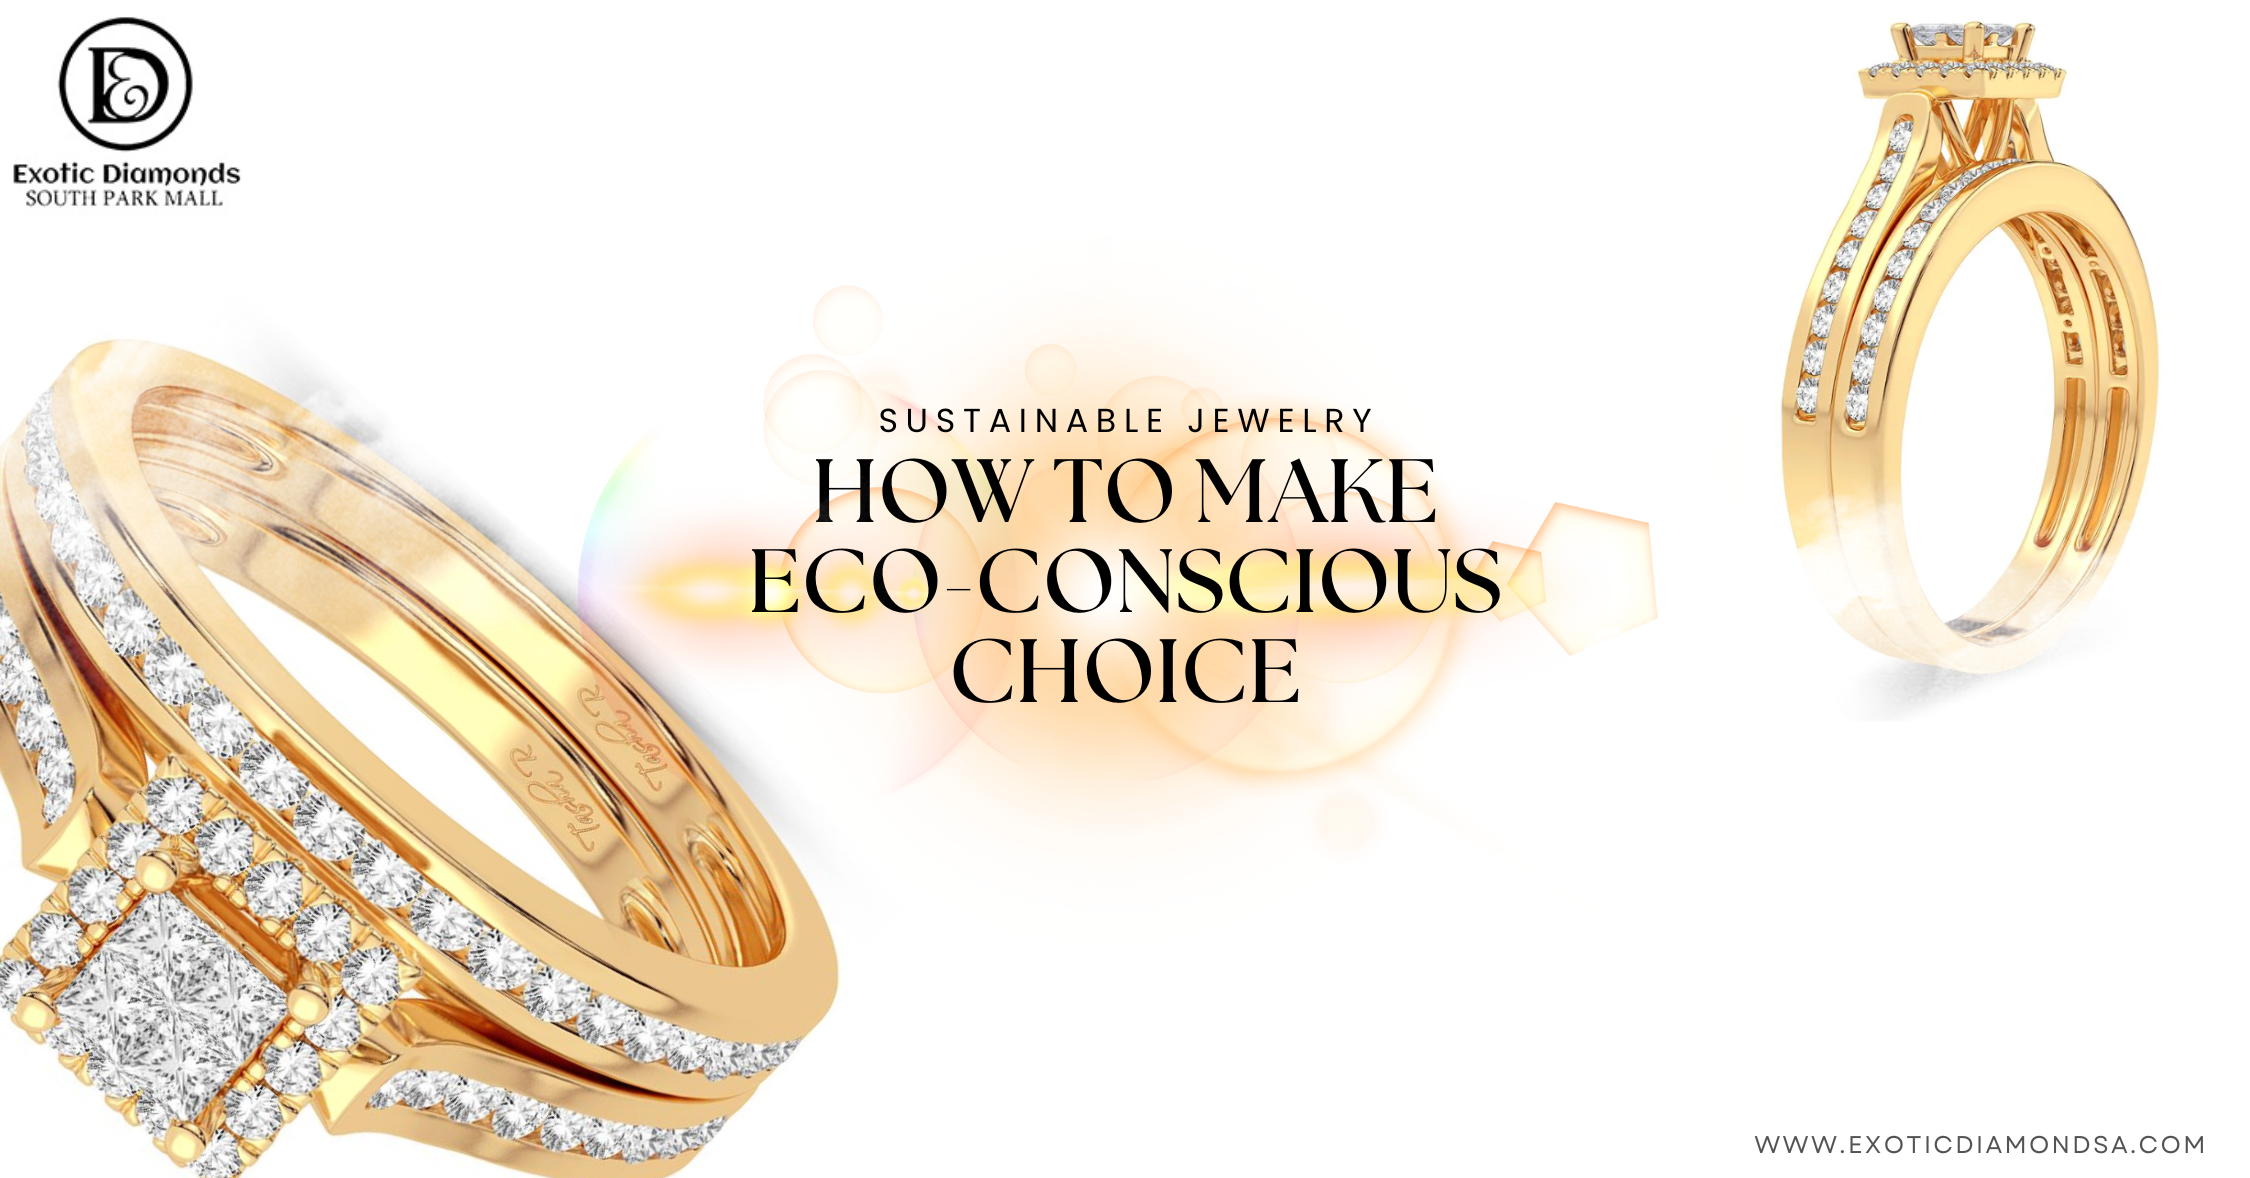 SUSTAINABLE JEWELRY HOW TO MAKE ECO-CONSCIOUS CHOICE